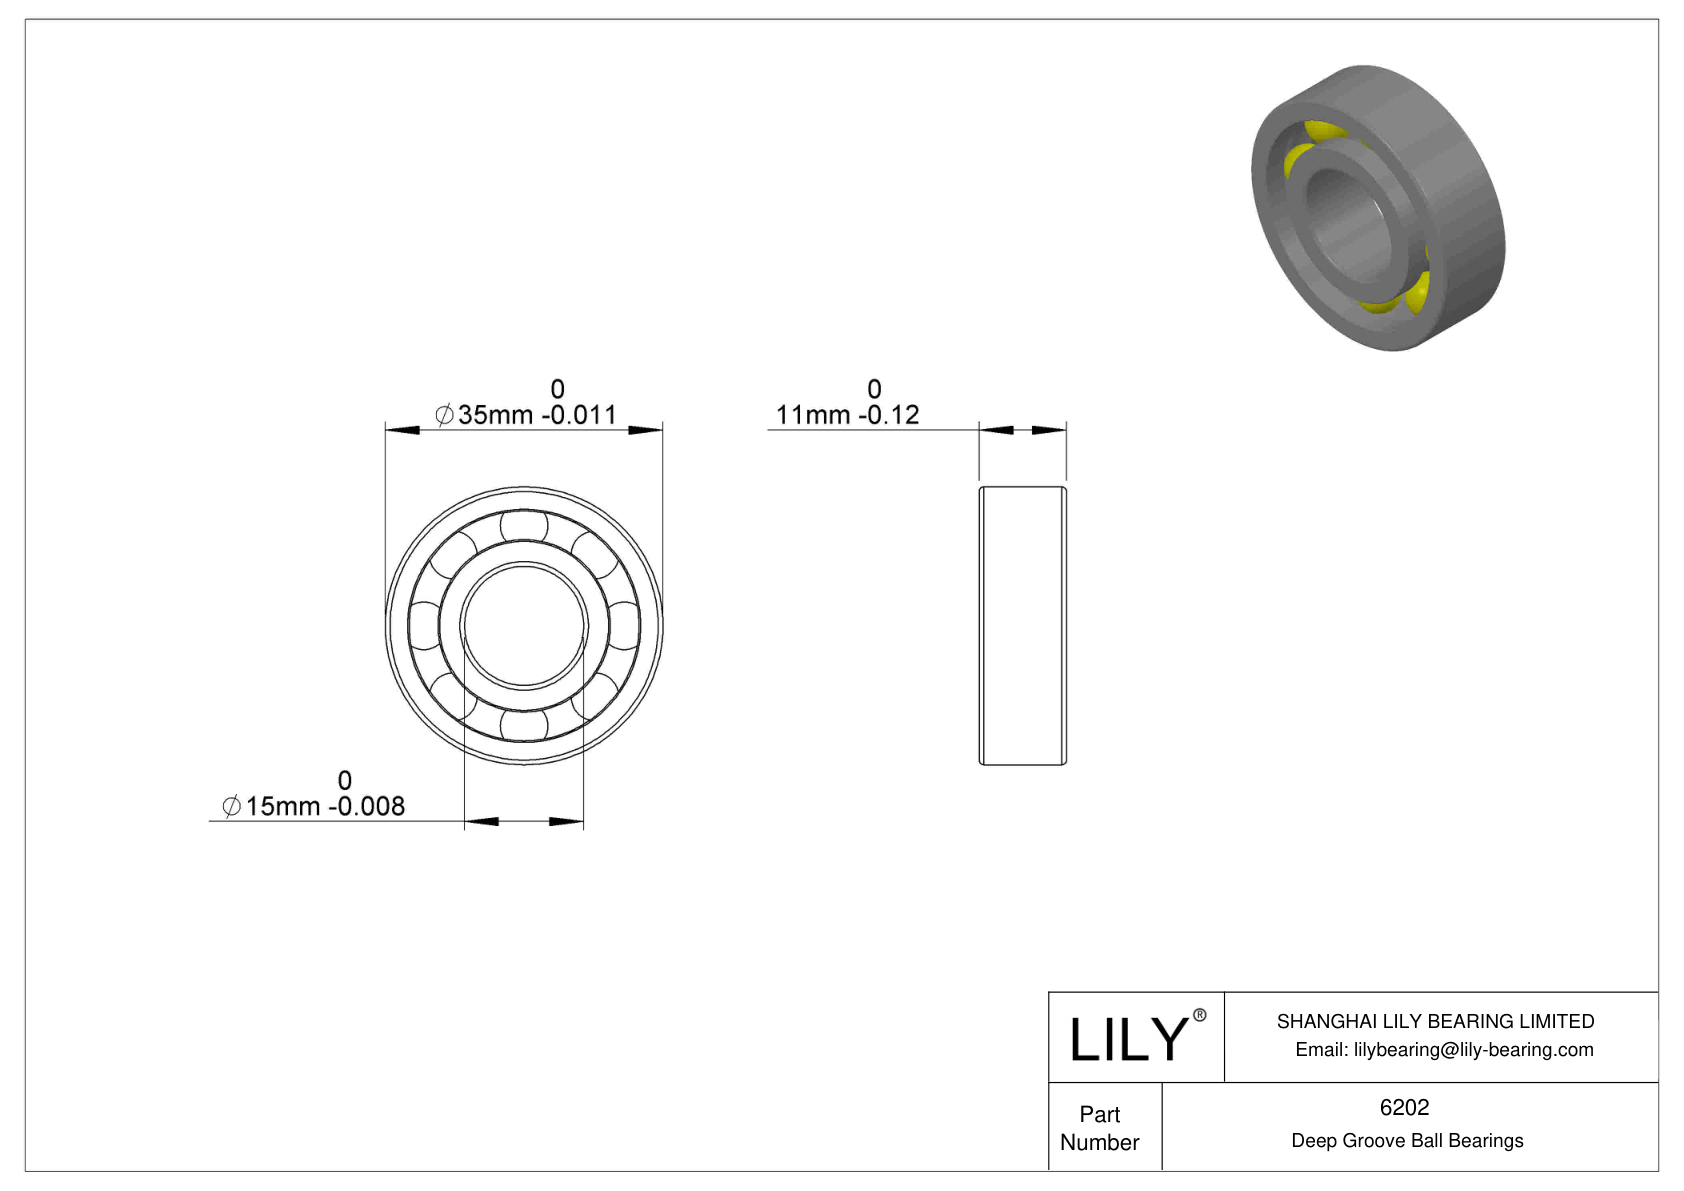 LILY-PU620243-15C2L12M10 Polyurethane Coated Bearing With Screw cad drawing